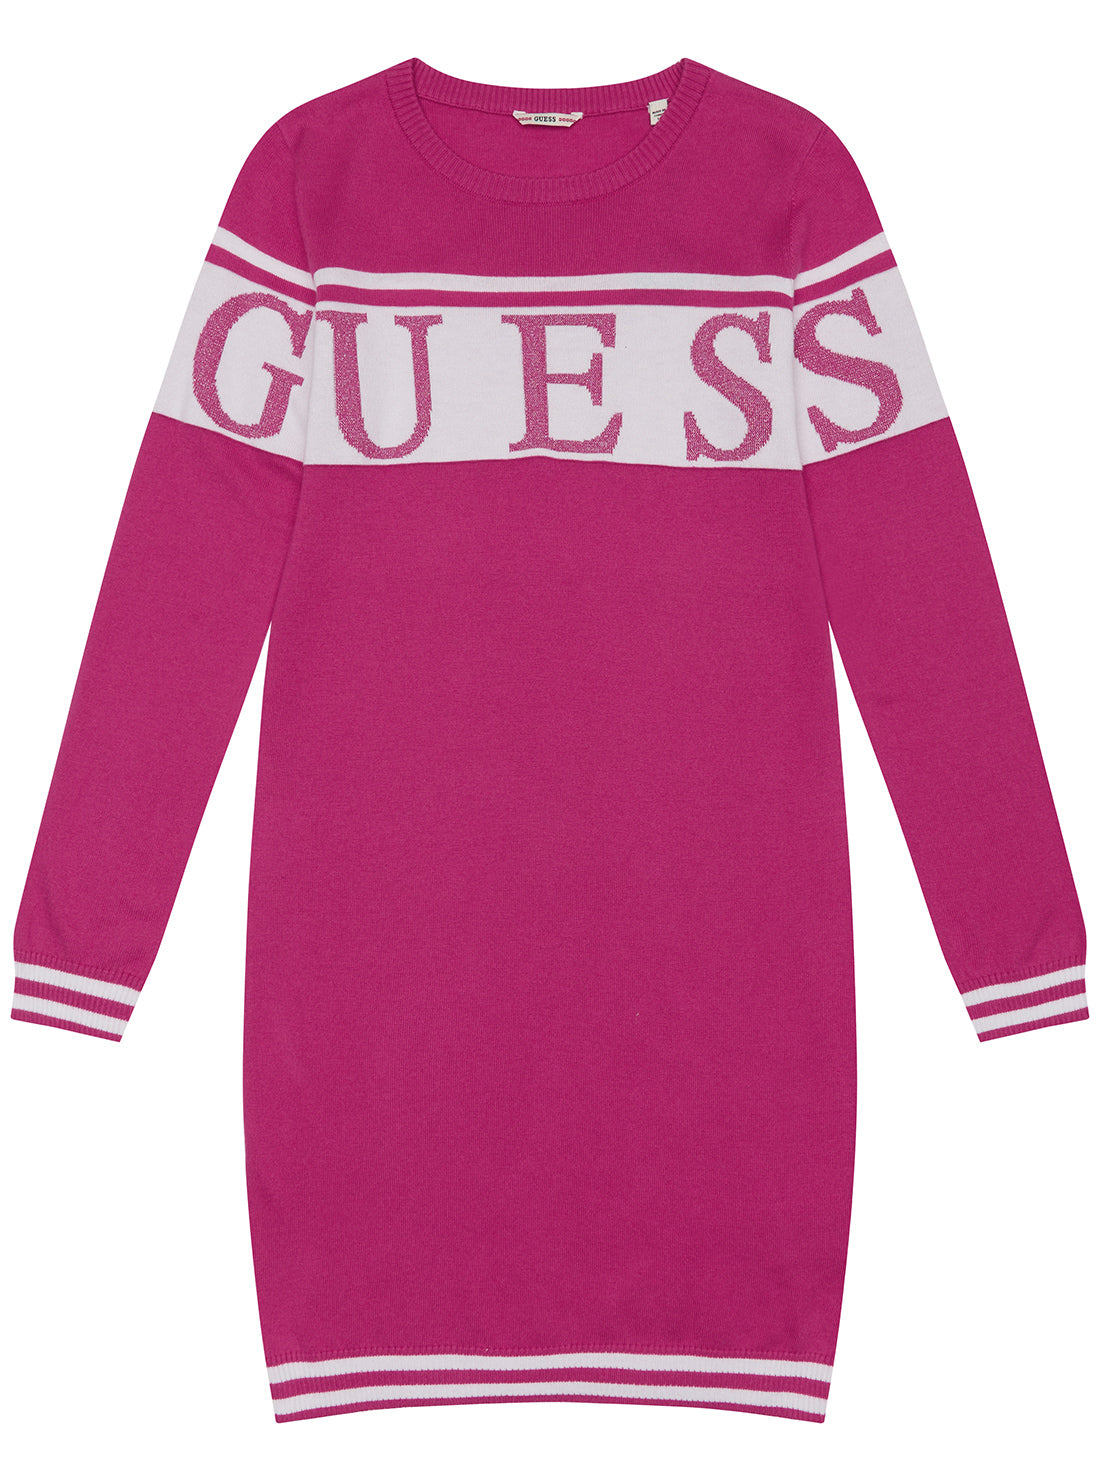 GUESS Pink Long Sleeve Knit Dress (7-16) front view